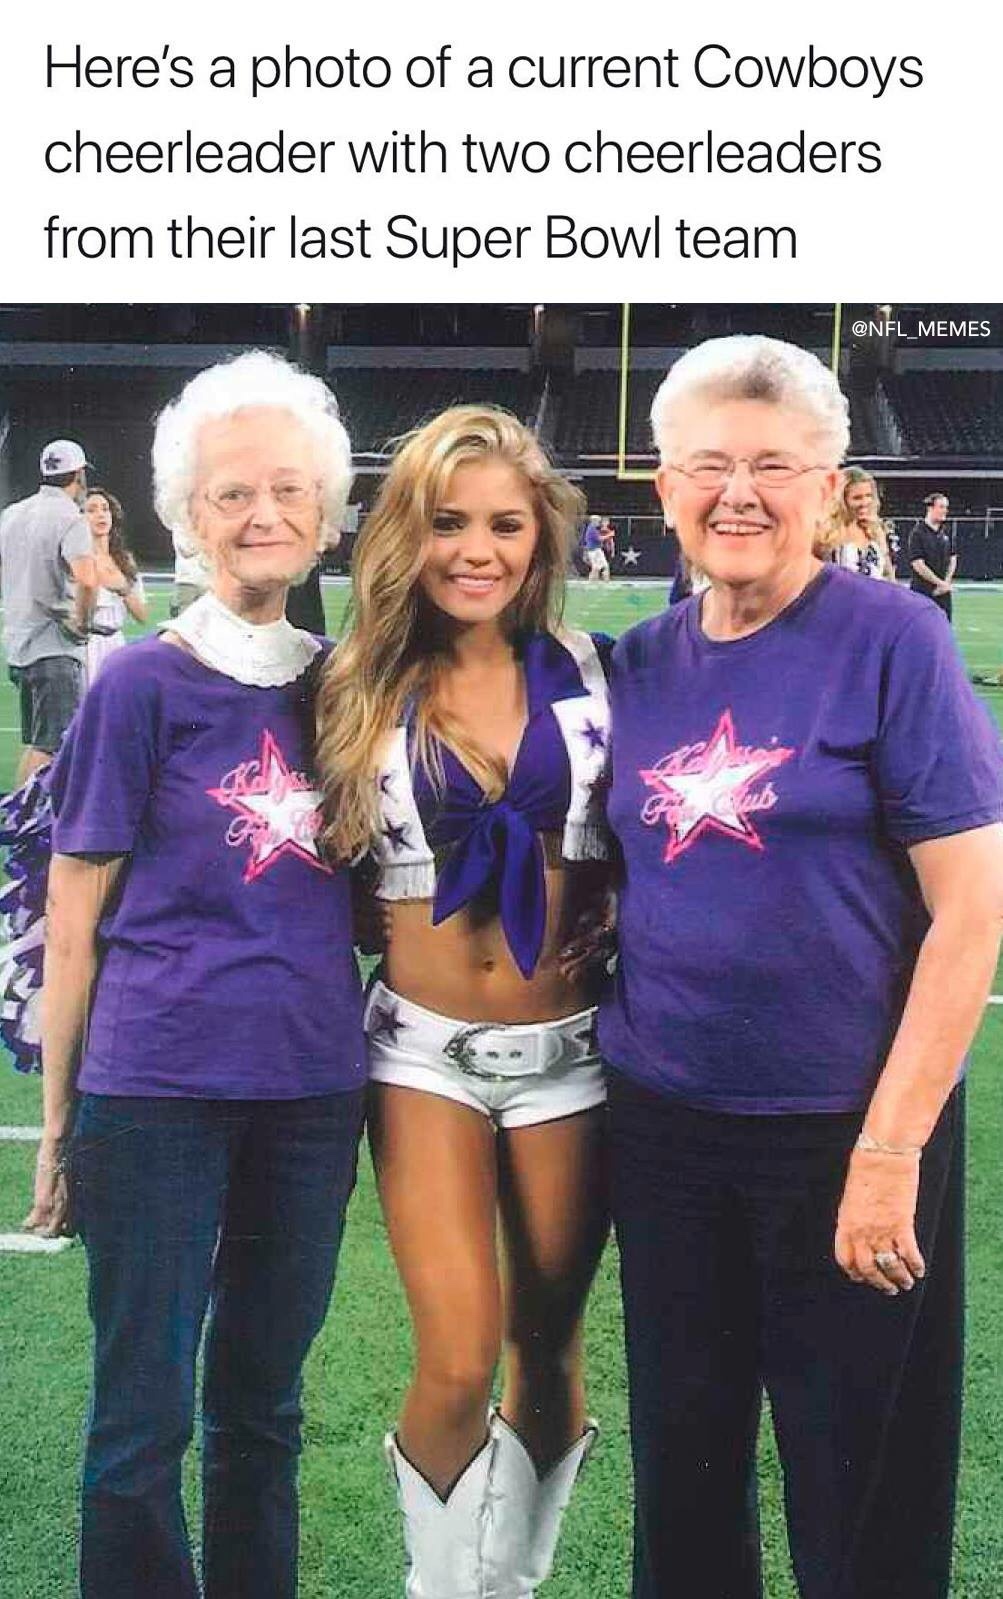 cowboys cheerleaders from last super bowl - Here's a photo of a current Cowboys cheerleader with two cheerleaders from their last Super Bowl team